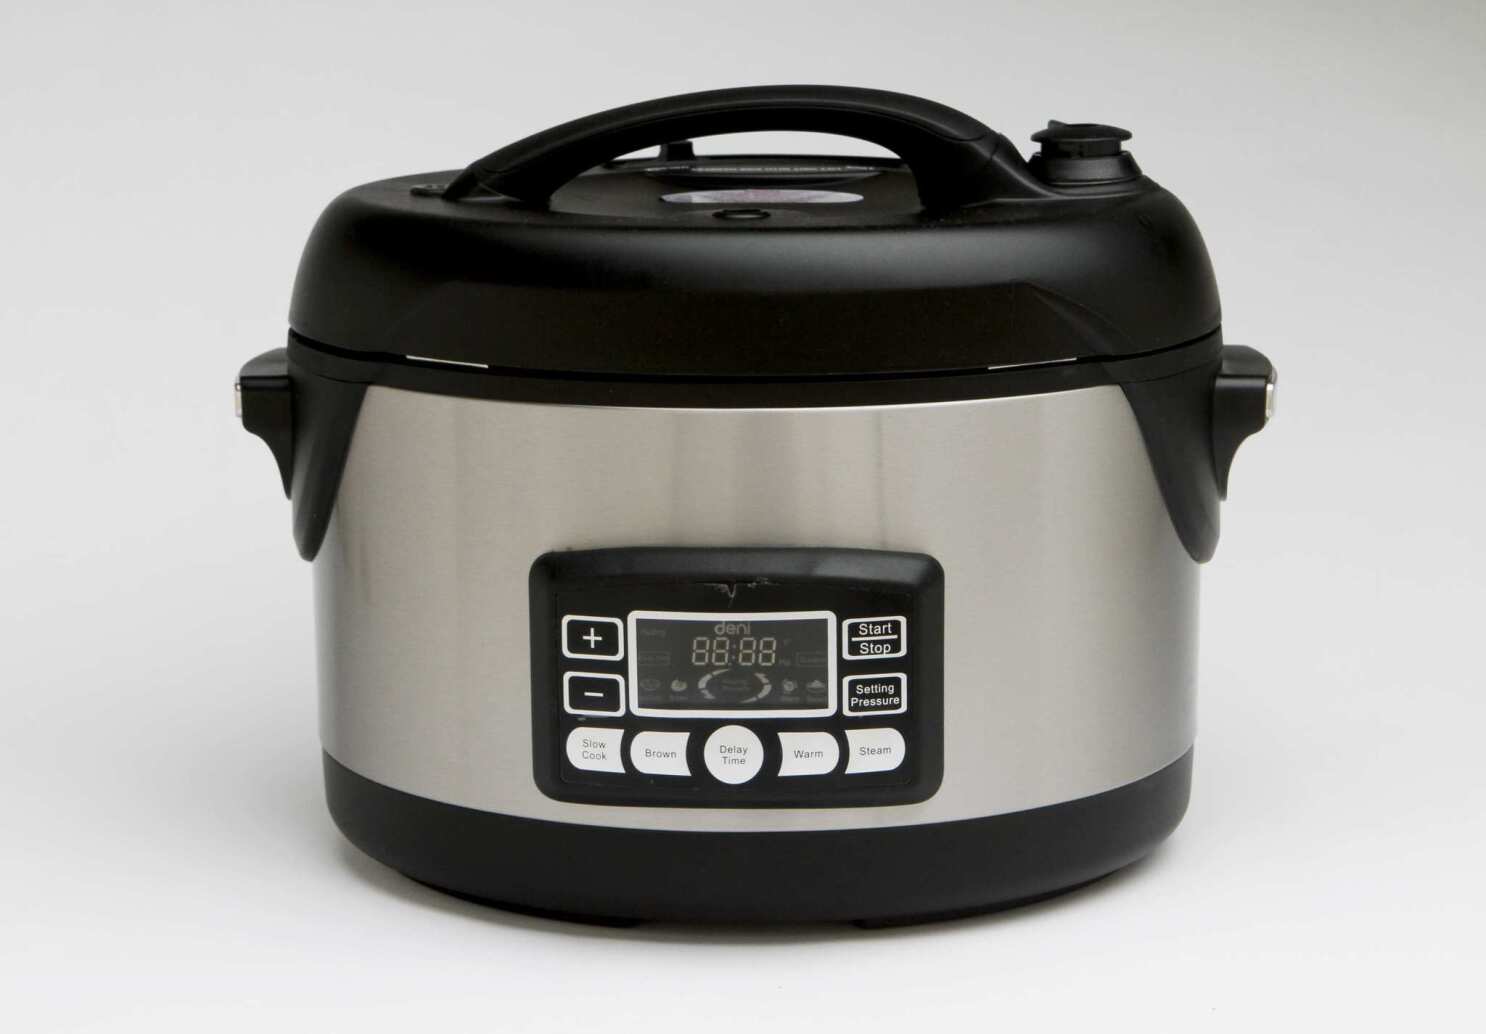 CooksEssentials 8 qt. Digital Stainless Steel Pressure Cooker with